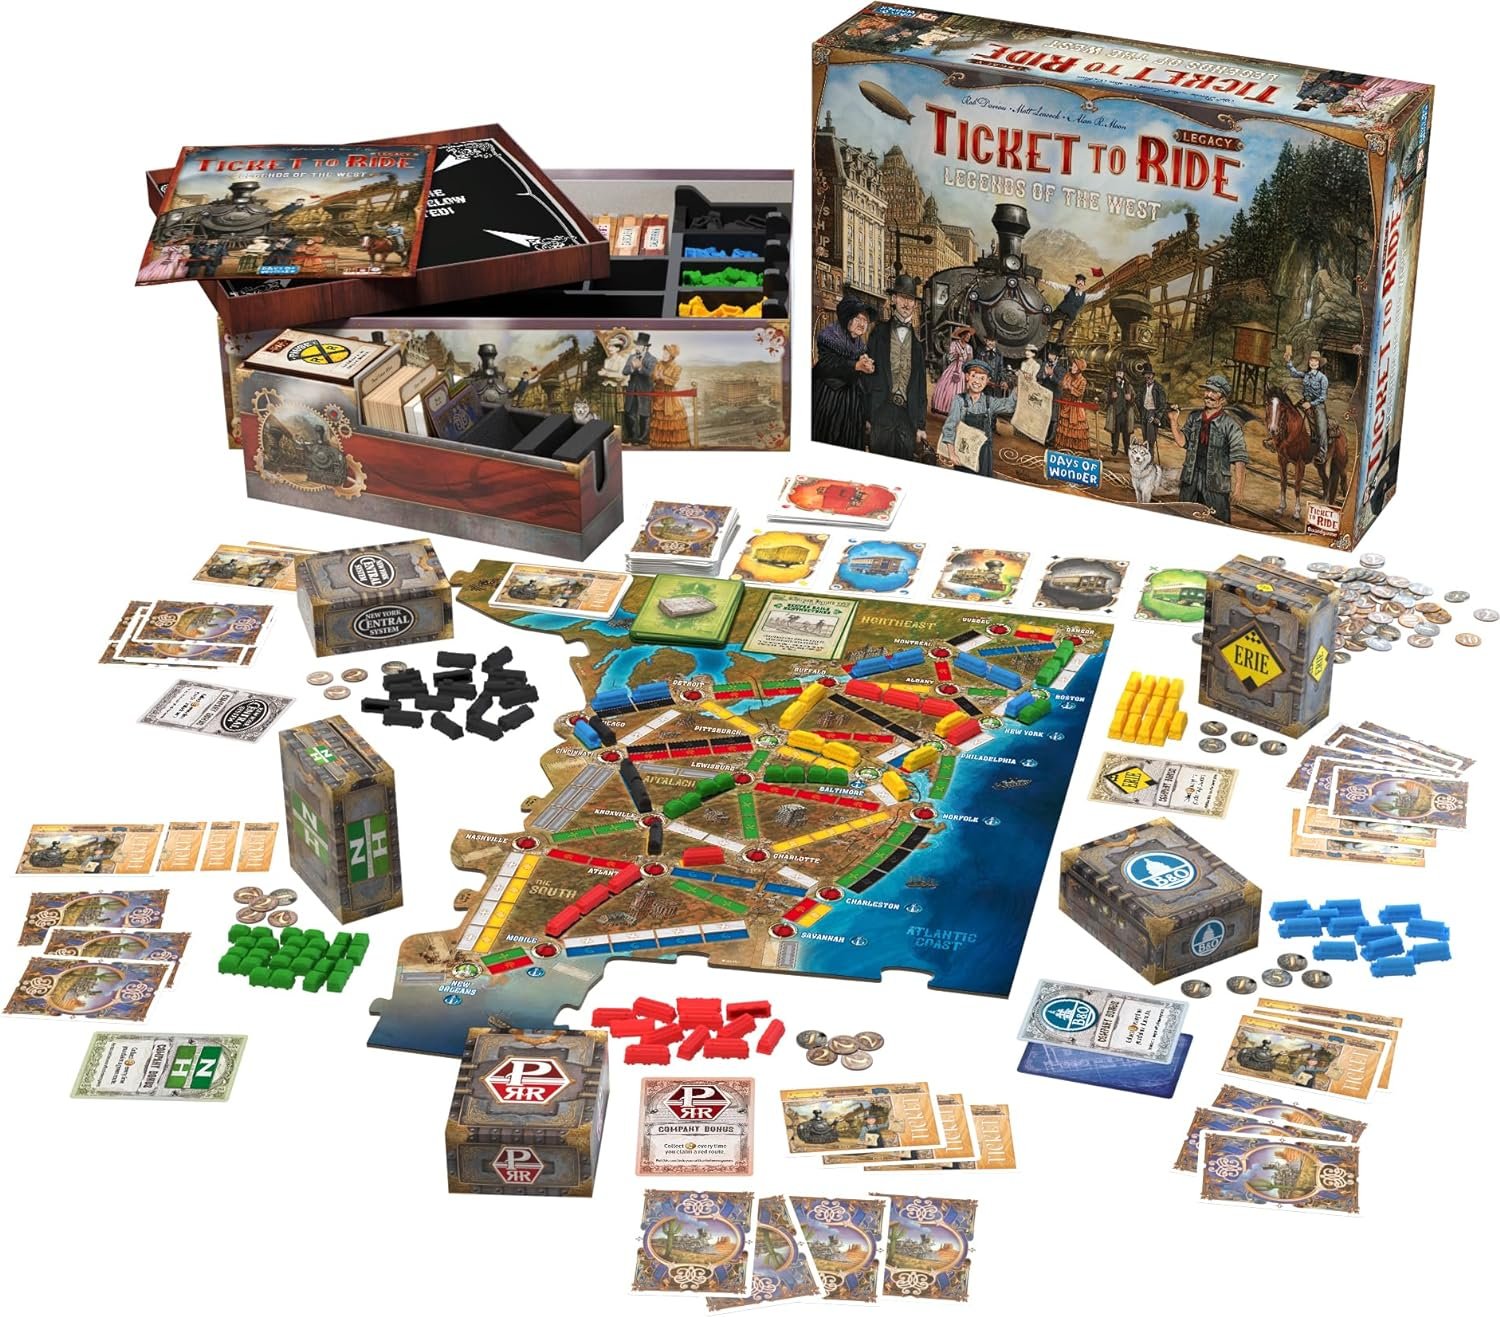 Ticket to Ride Legacy: Legends of the West Review